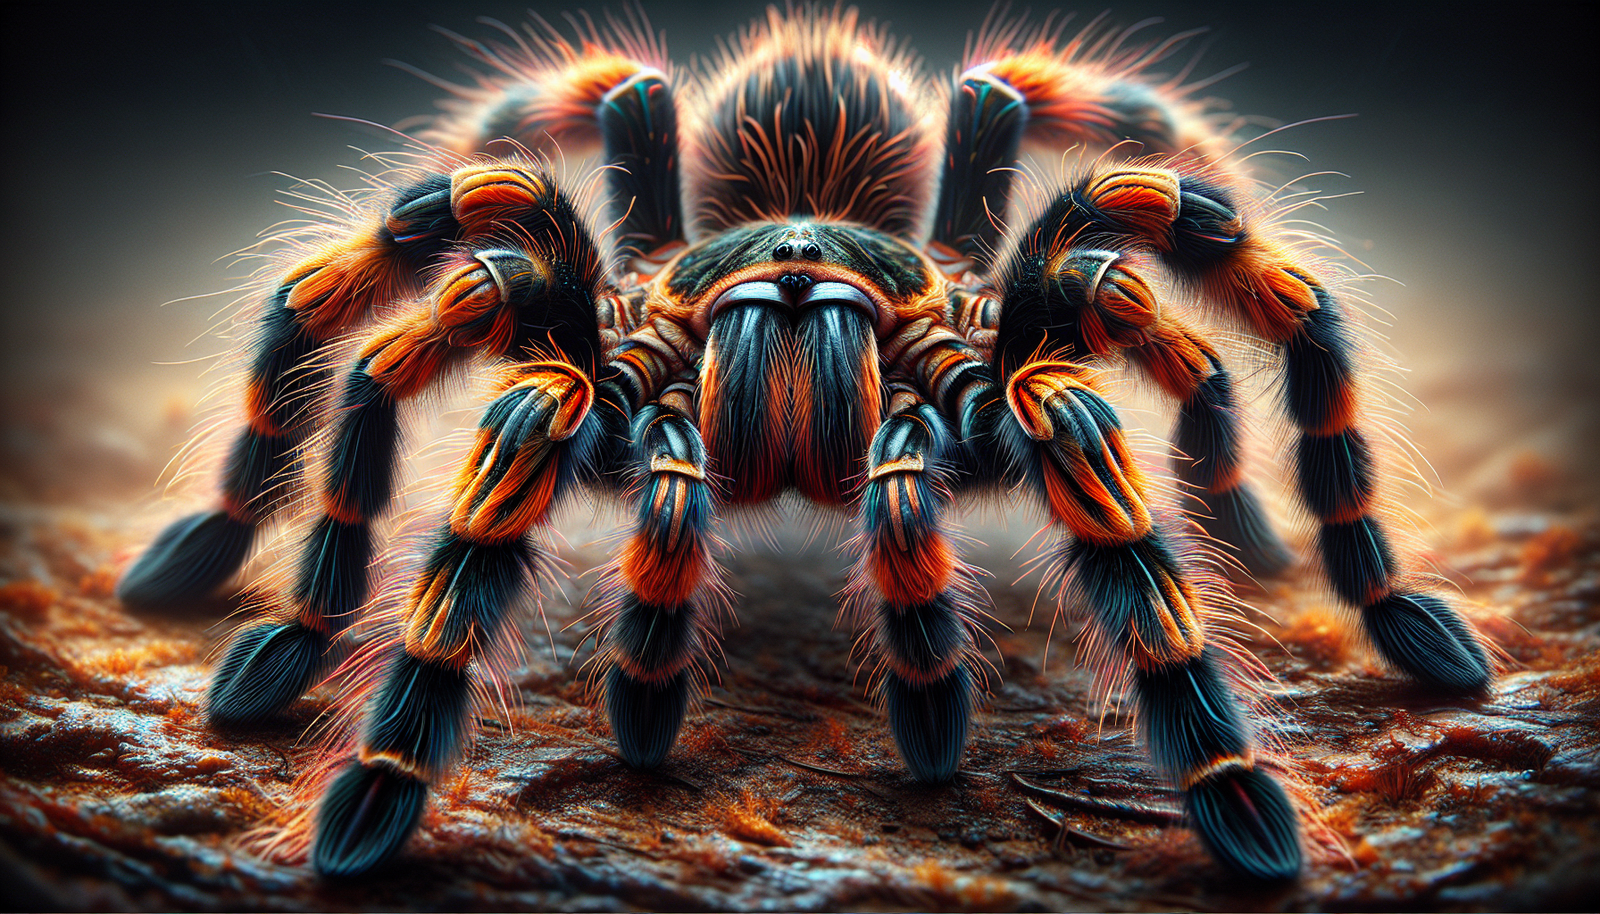 What Are The Characteristics Of The Vibrant And Fast-moving Malaysian Tiger Tarantula?